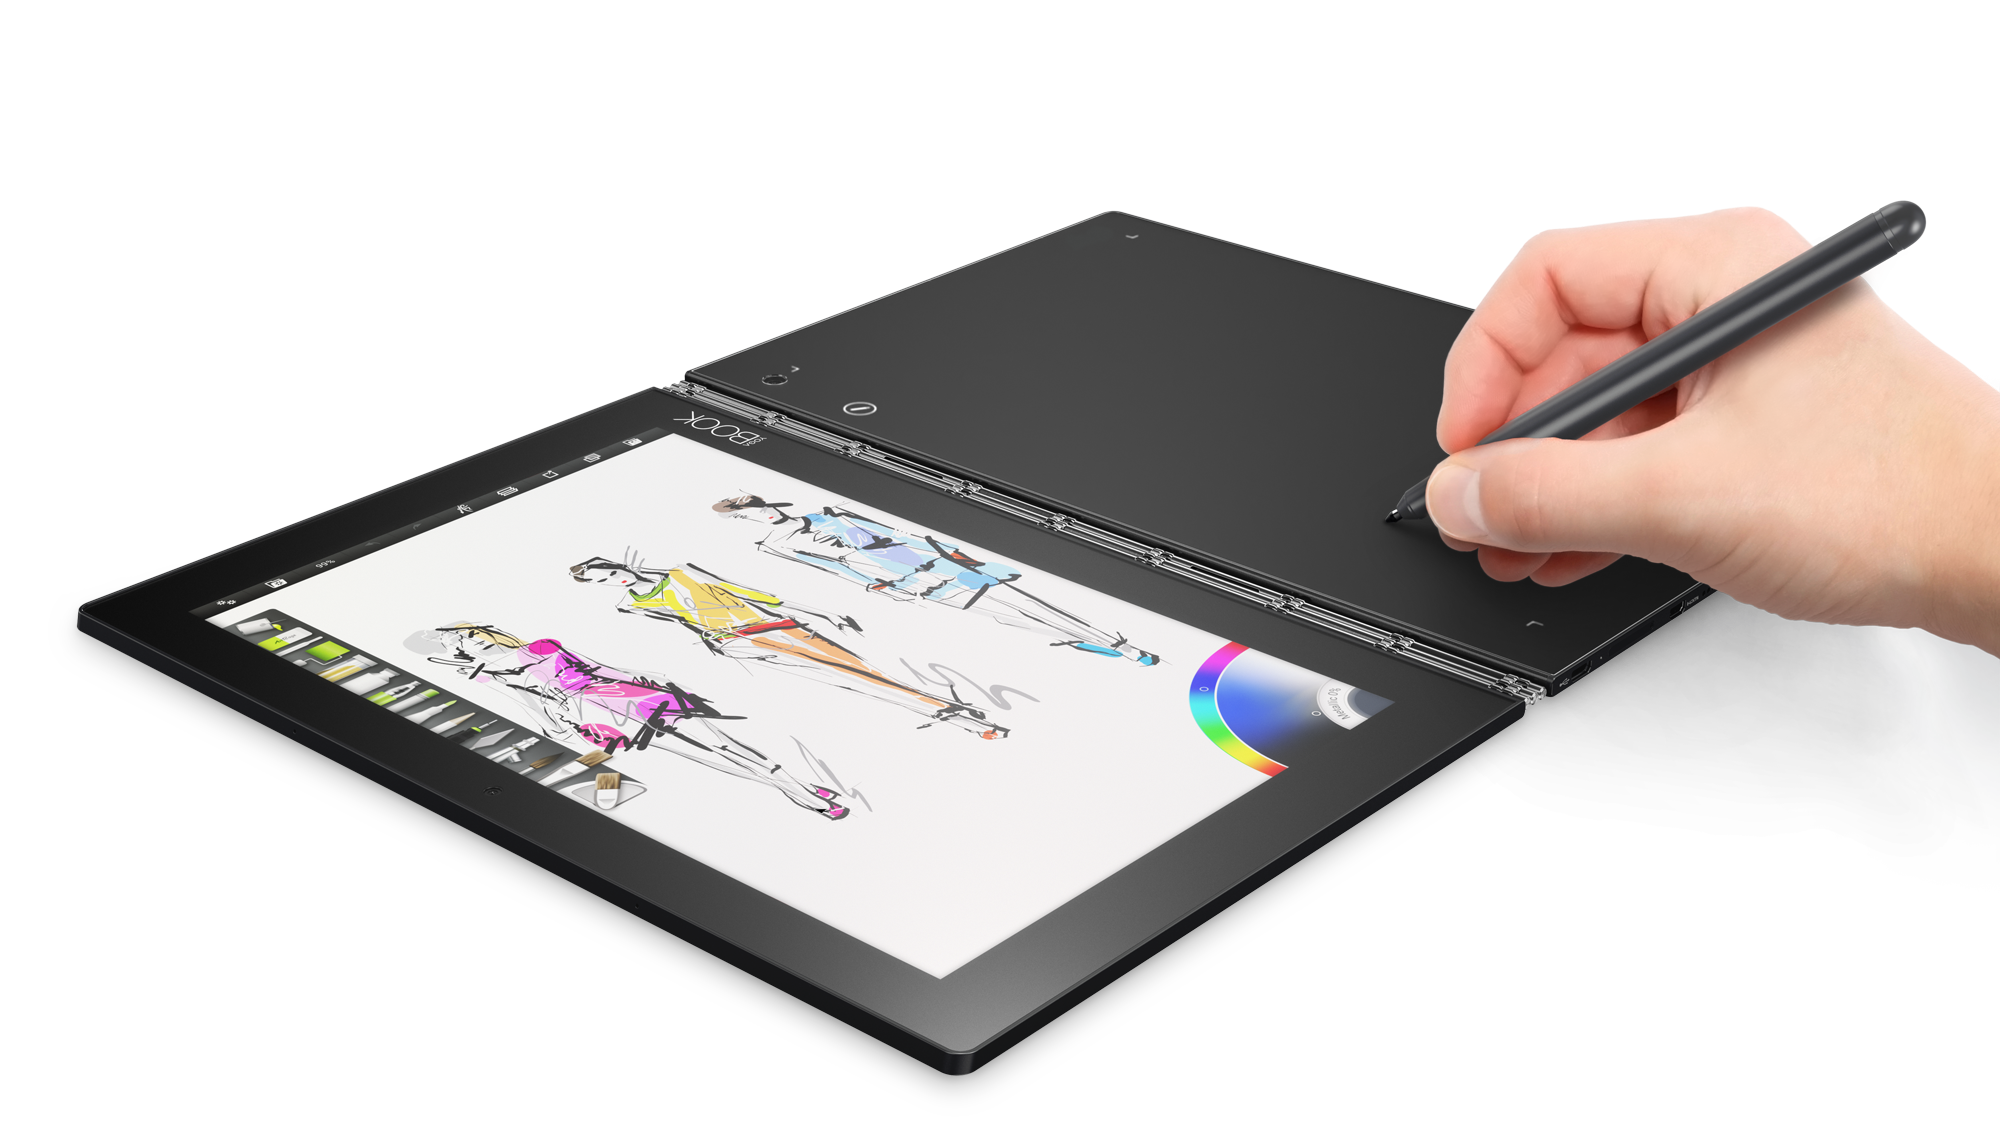 Lenovo’s new Yoga Book is a 360-degree laptop without the keyboard | Ars Technica